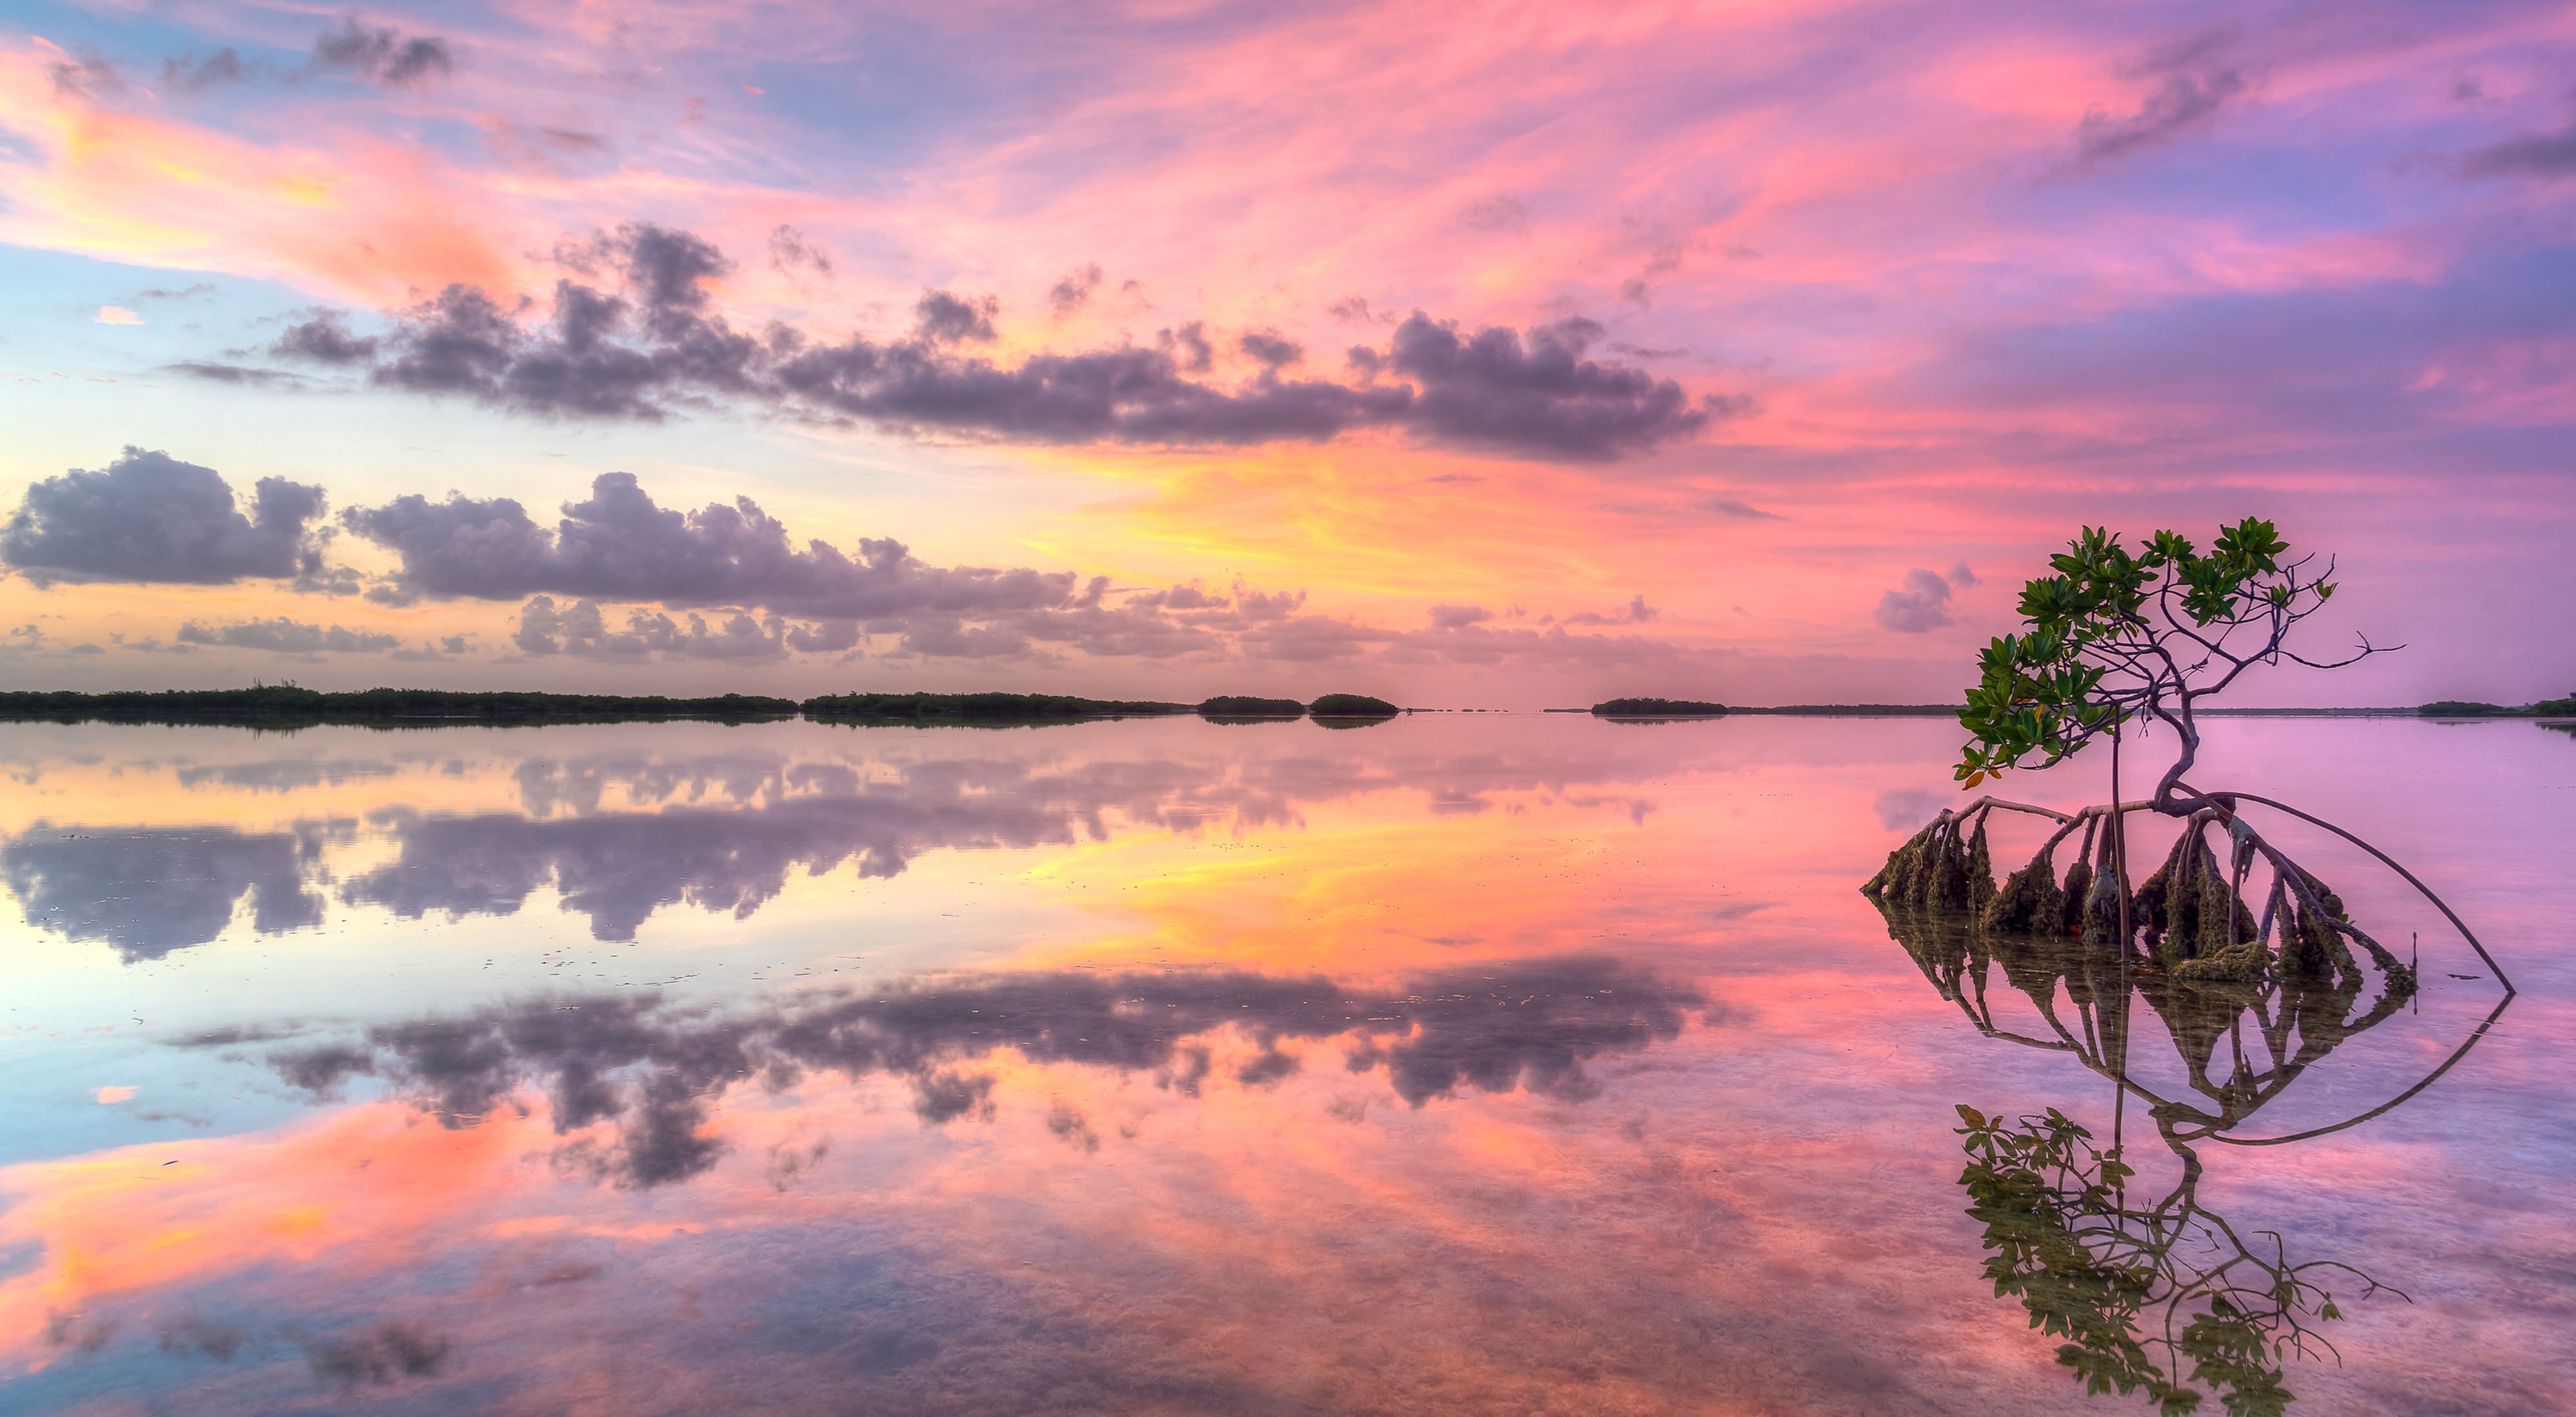 A large expanse of water glows orange and pink as it reflects the colors of the sun in a setting sky. A single small mangrove tree grows in the water in the foreground.